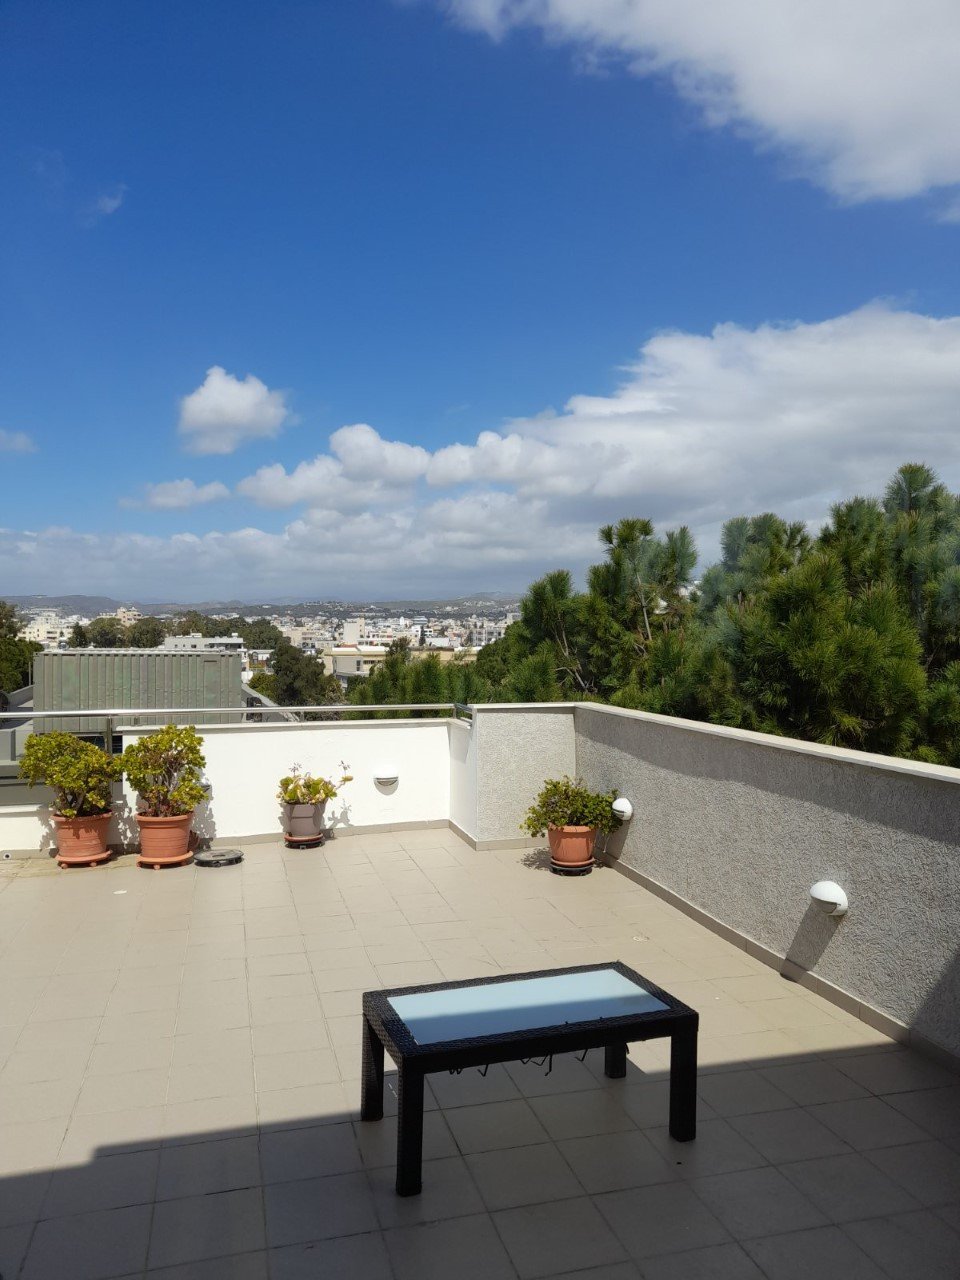 Property for Rent: Apartment (Flat) in Agia Zoni, Limassol for Rent | Key Realtor Cyprus